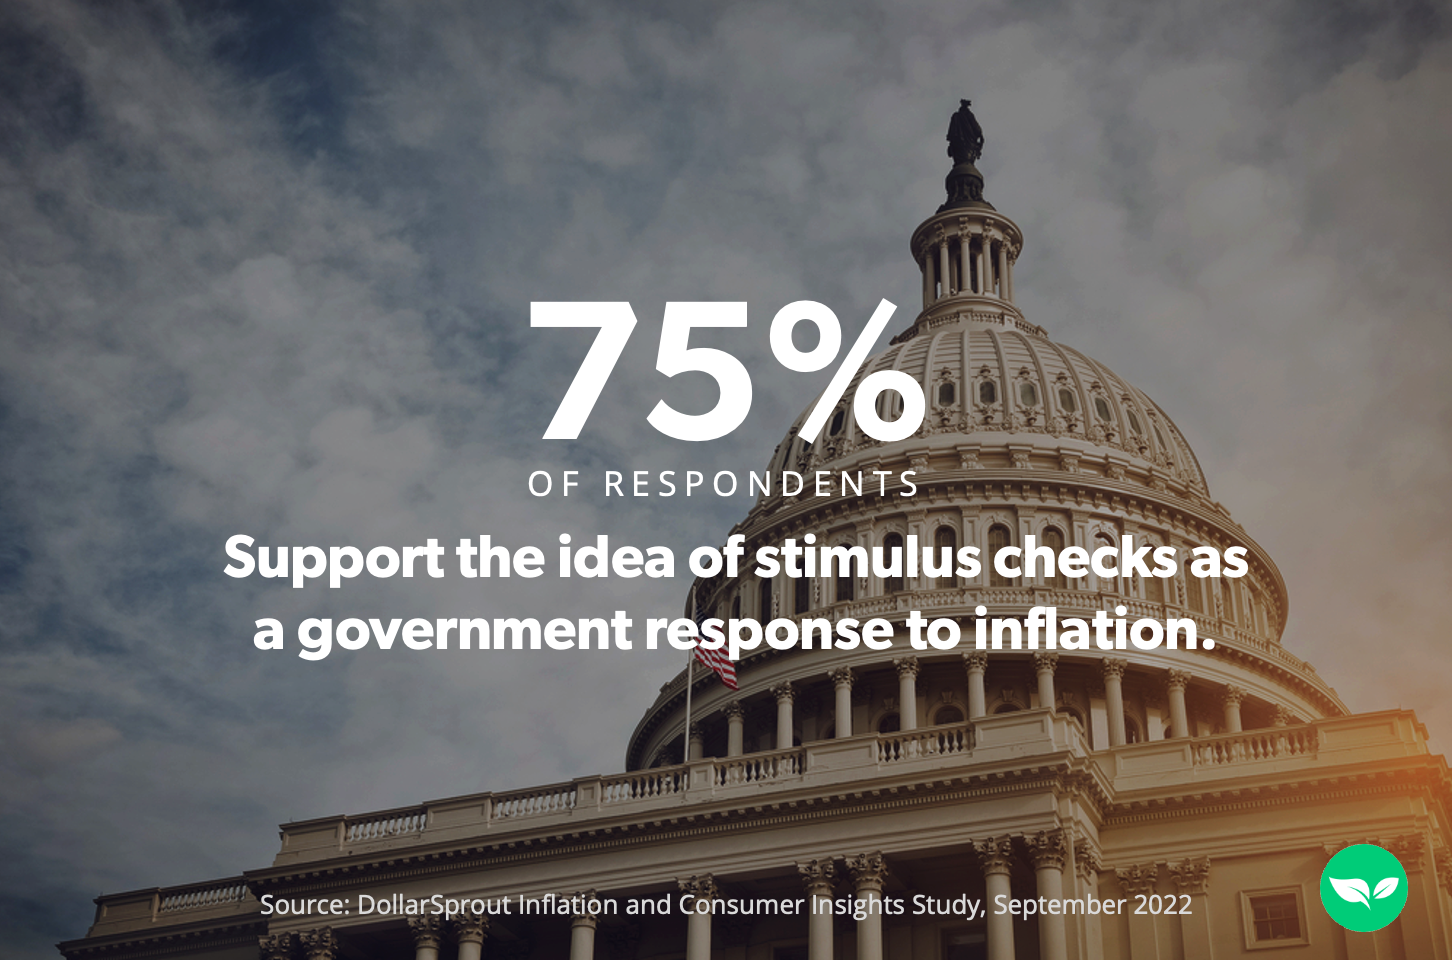 75% of Americans support the idea of ​​stimulus checks as a government response to inflation.